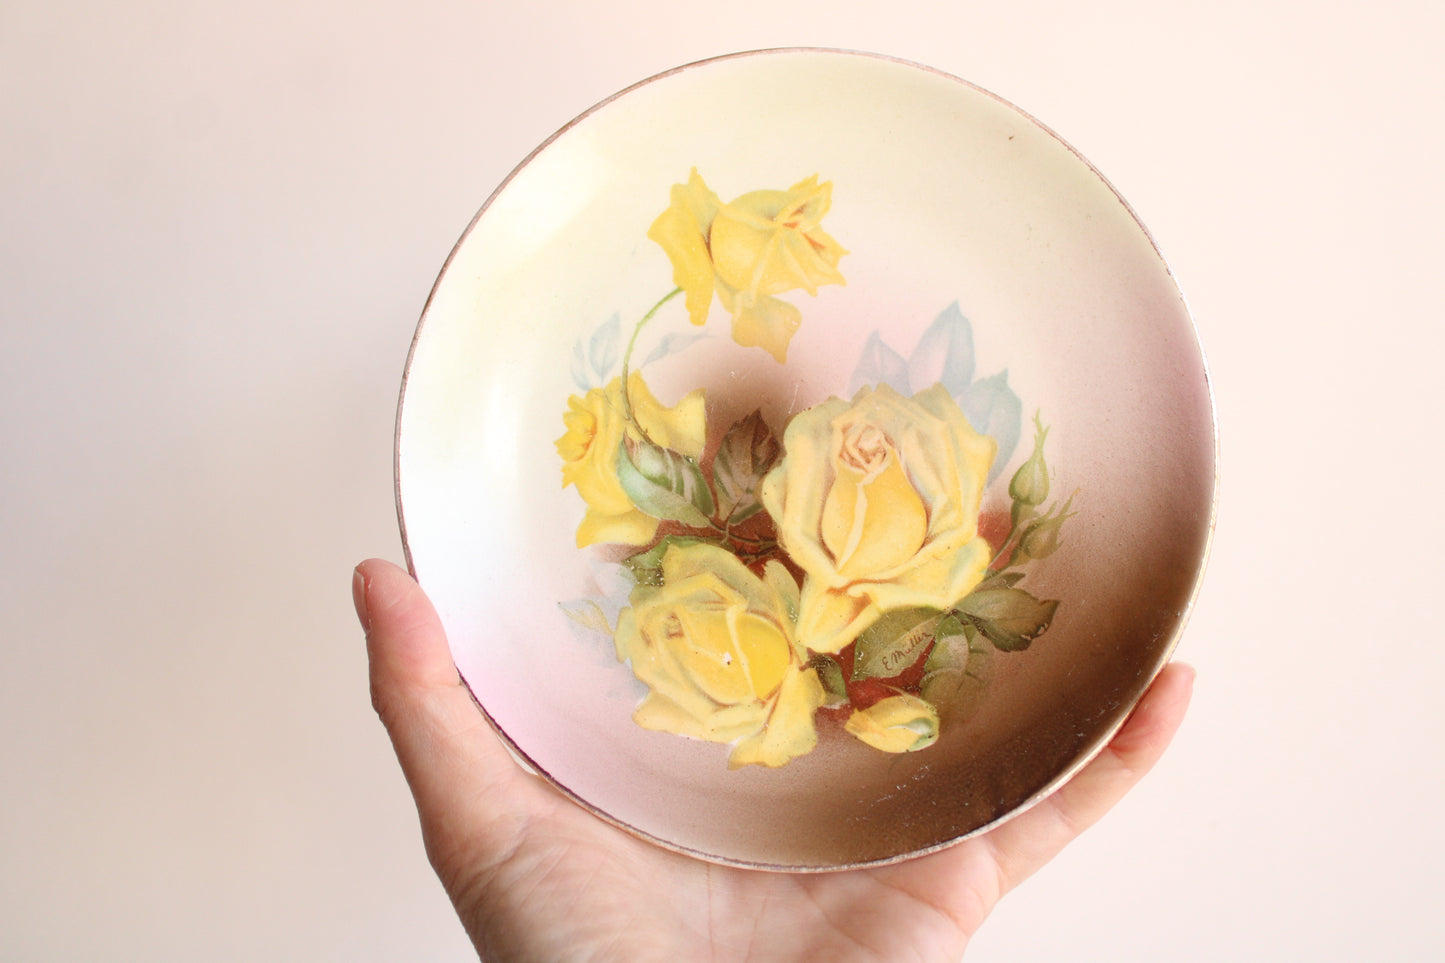 Vintage 1950s Hand Painted Yellow Roses Small Dessert Plate